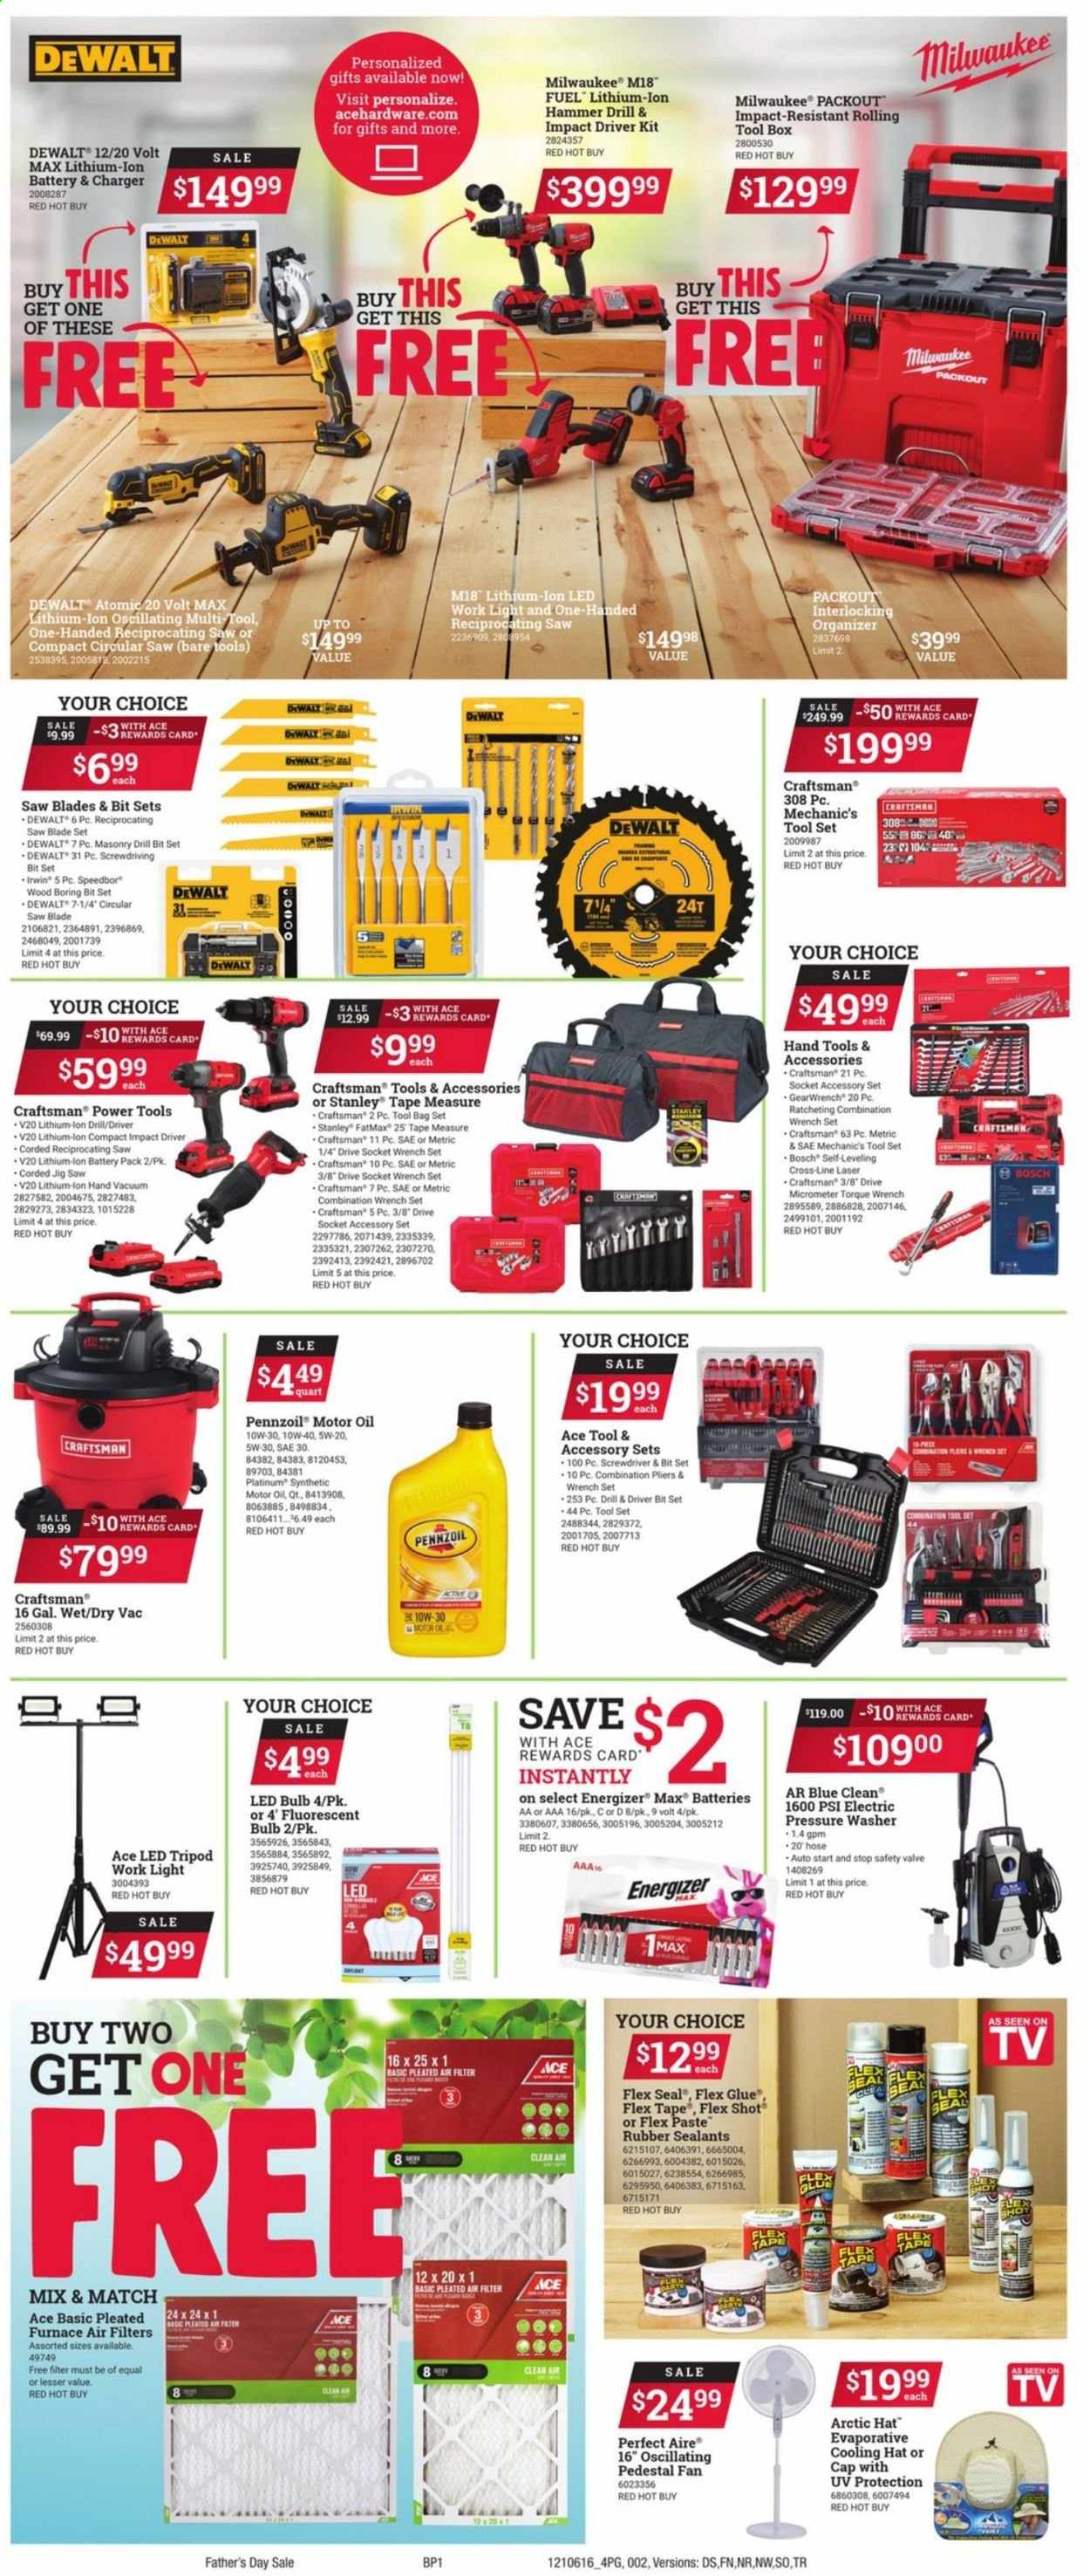 thumbnail - ACE Hardware Flyer - 06/16/2021 - 06/29/2021 - Sales products - tools & accessories, flex glue, glue, eraser, bulb, Energizer, LED bulb, Bosch, stand fan, vacuum cleaner, Stanley, socket, furnace, Milwaukee, DeWALT, impact driver, power tools, hammer, drill bit set, Craftsman, circular saw blade, circular saw, jig saw, reciprocating saw, screwdriver, pliers, tool box, socket set, wrench, tool set, wrench set, torque wrench, hand tools, measuring tape, electric pressure washer, mechanic's tools, pressure washer, tool bag, air filter, motor oil, Pennzoil. Page 2.